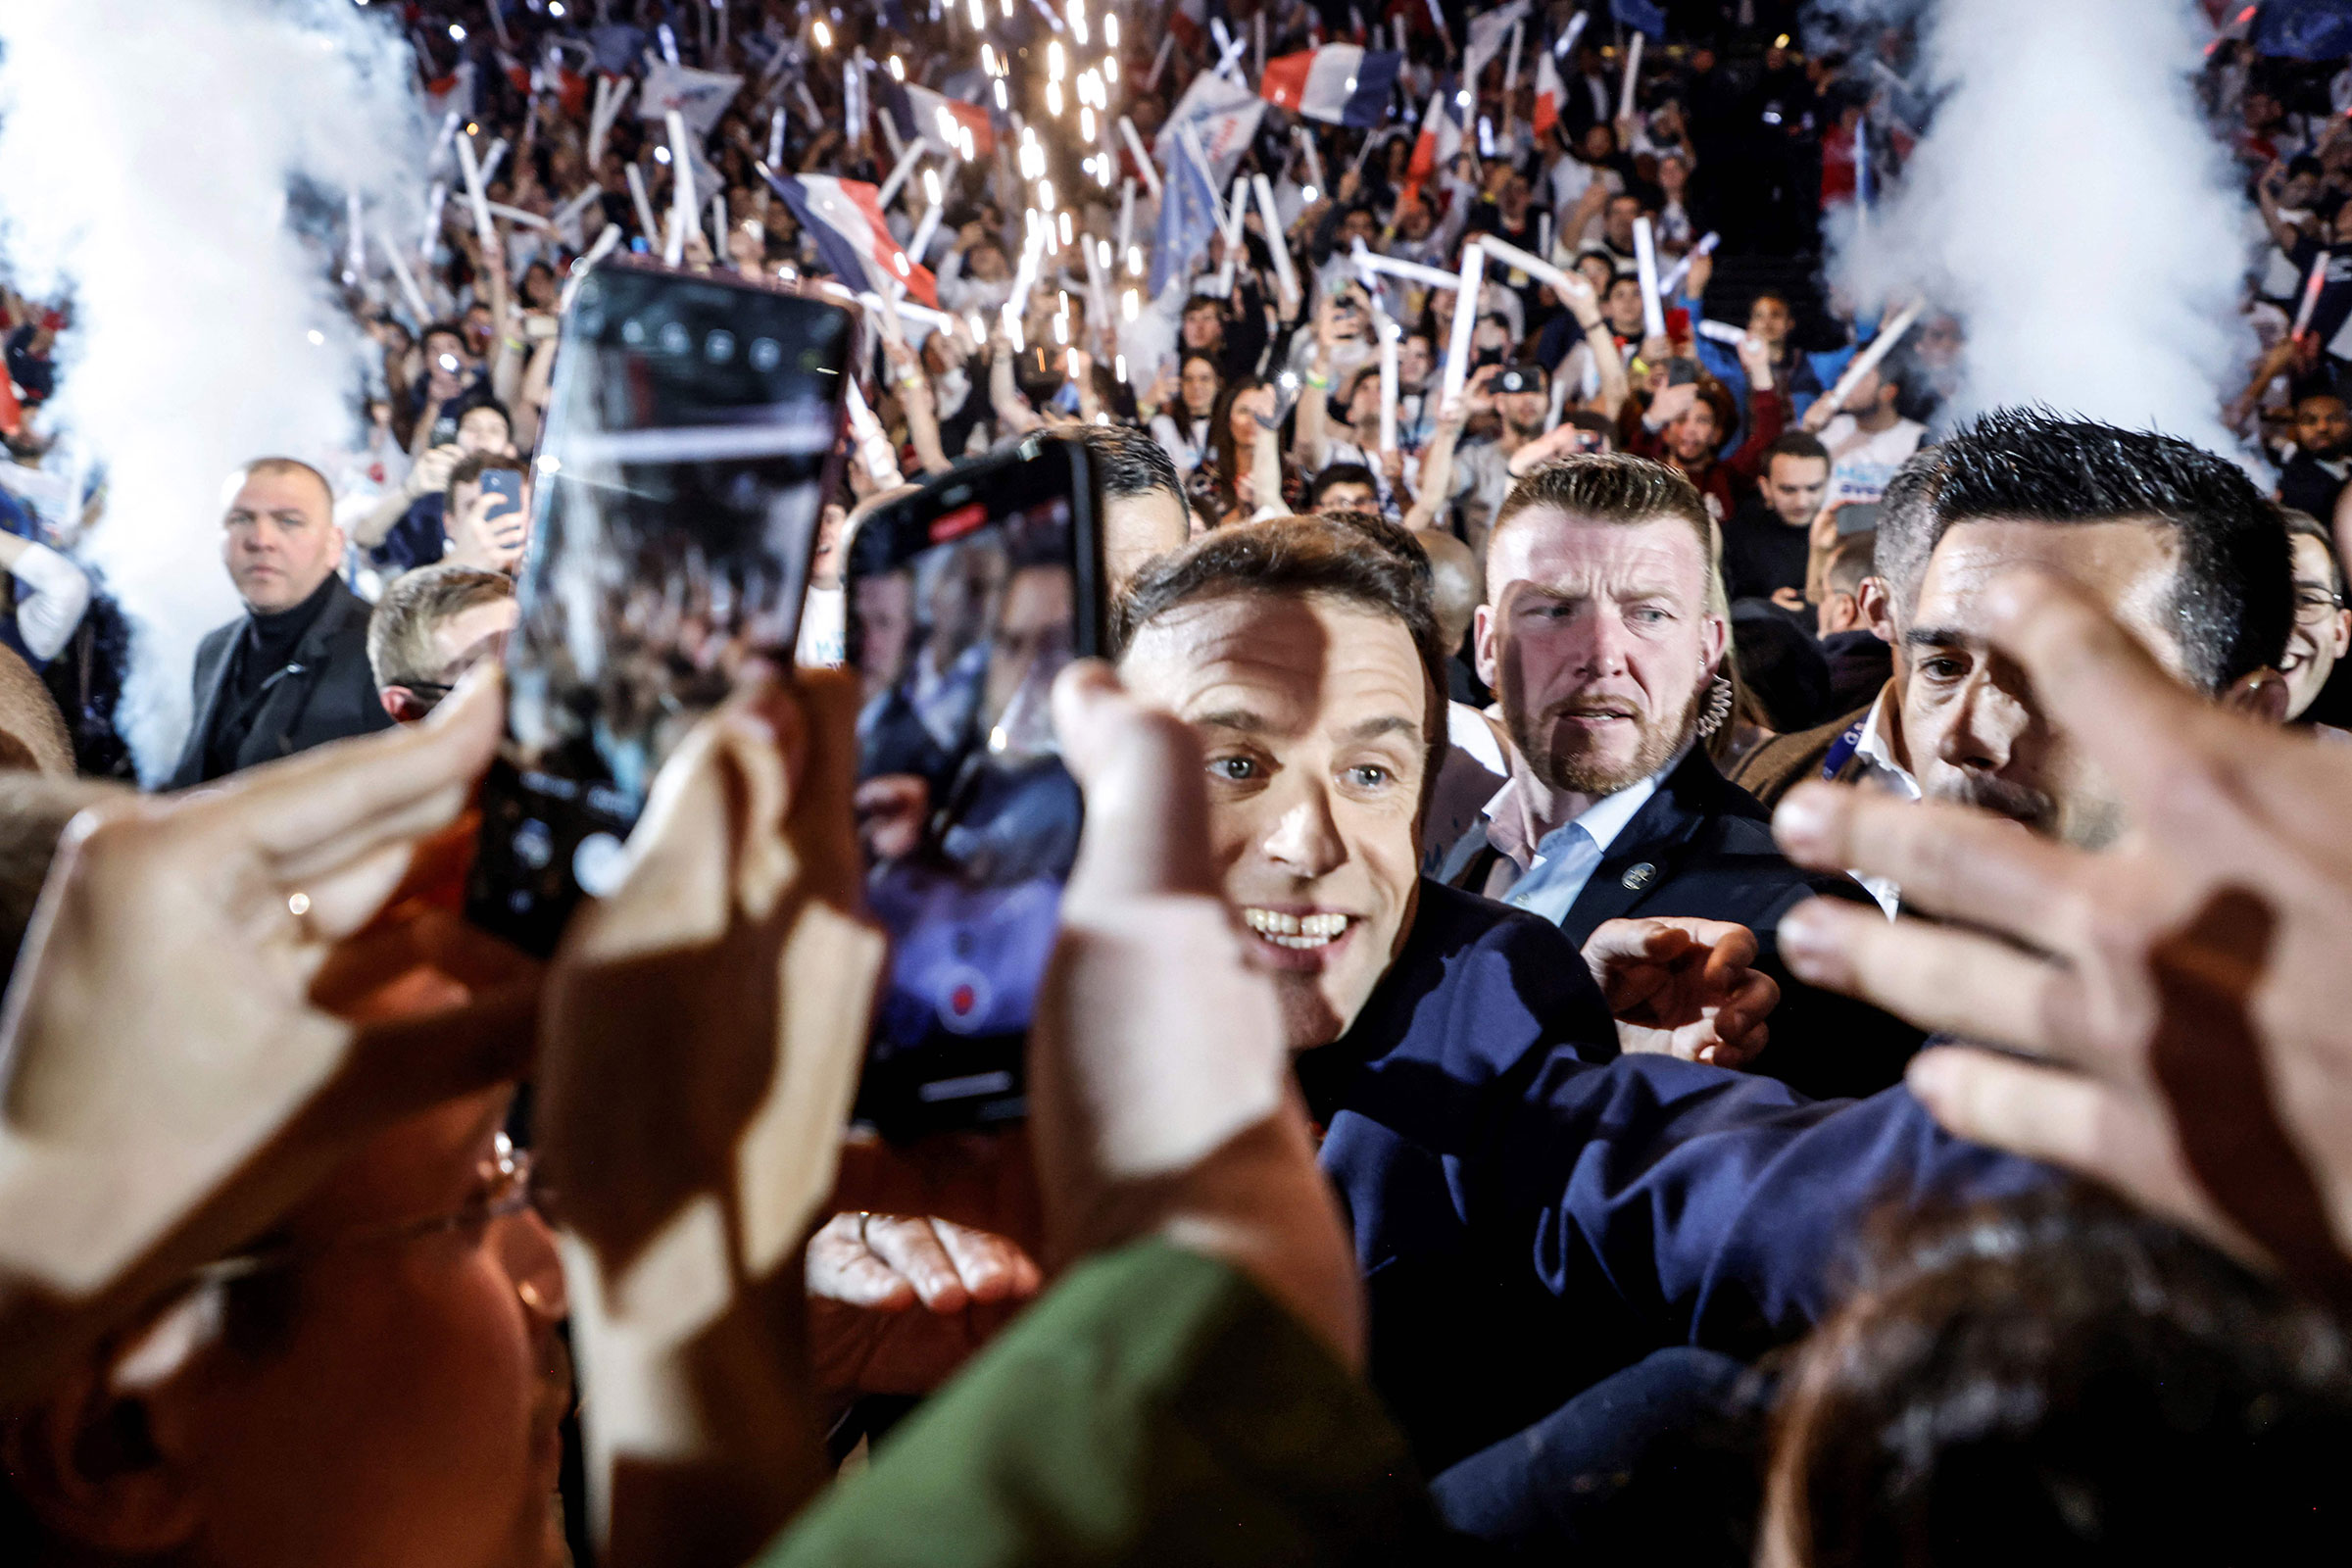 French President and liberal party La Republique en Marche candidate for re-election Emmanuel Macron salutes people as he arrives for his first campaign meeting at the Paris La Defense Arena in Nanterre, on the outskirts of Paris, on April 2. (Ludovic Marin—AFP/Getty Images)